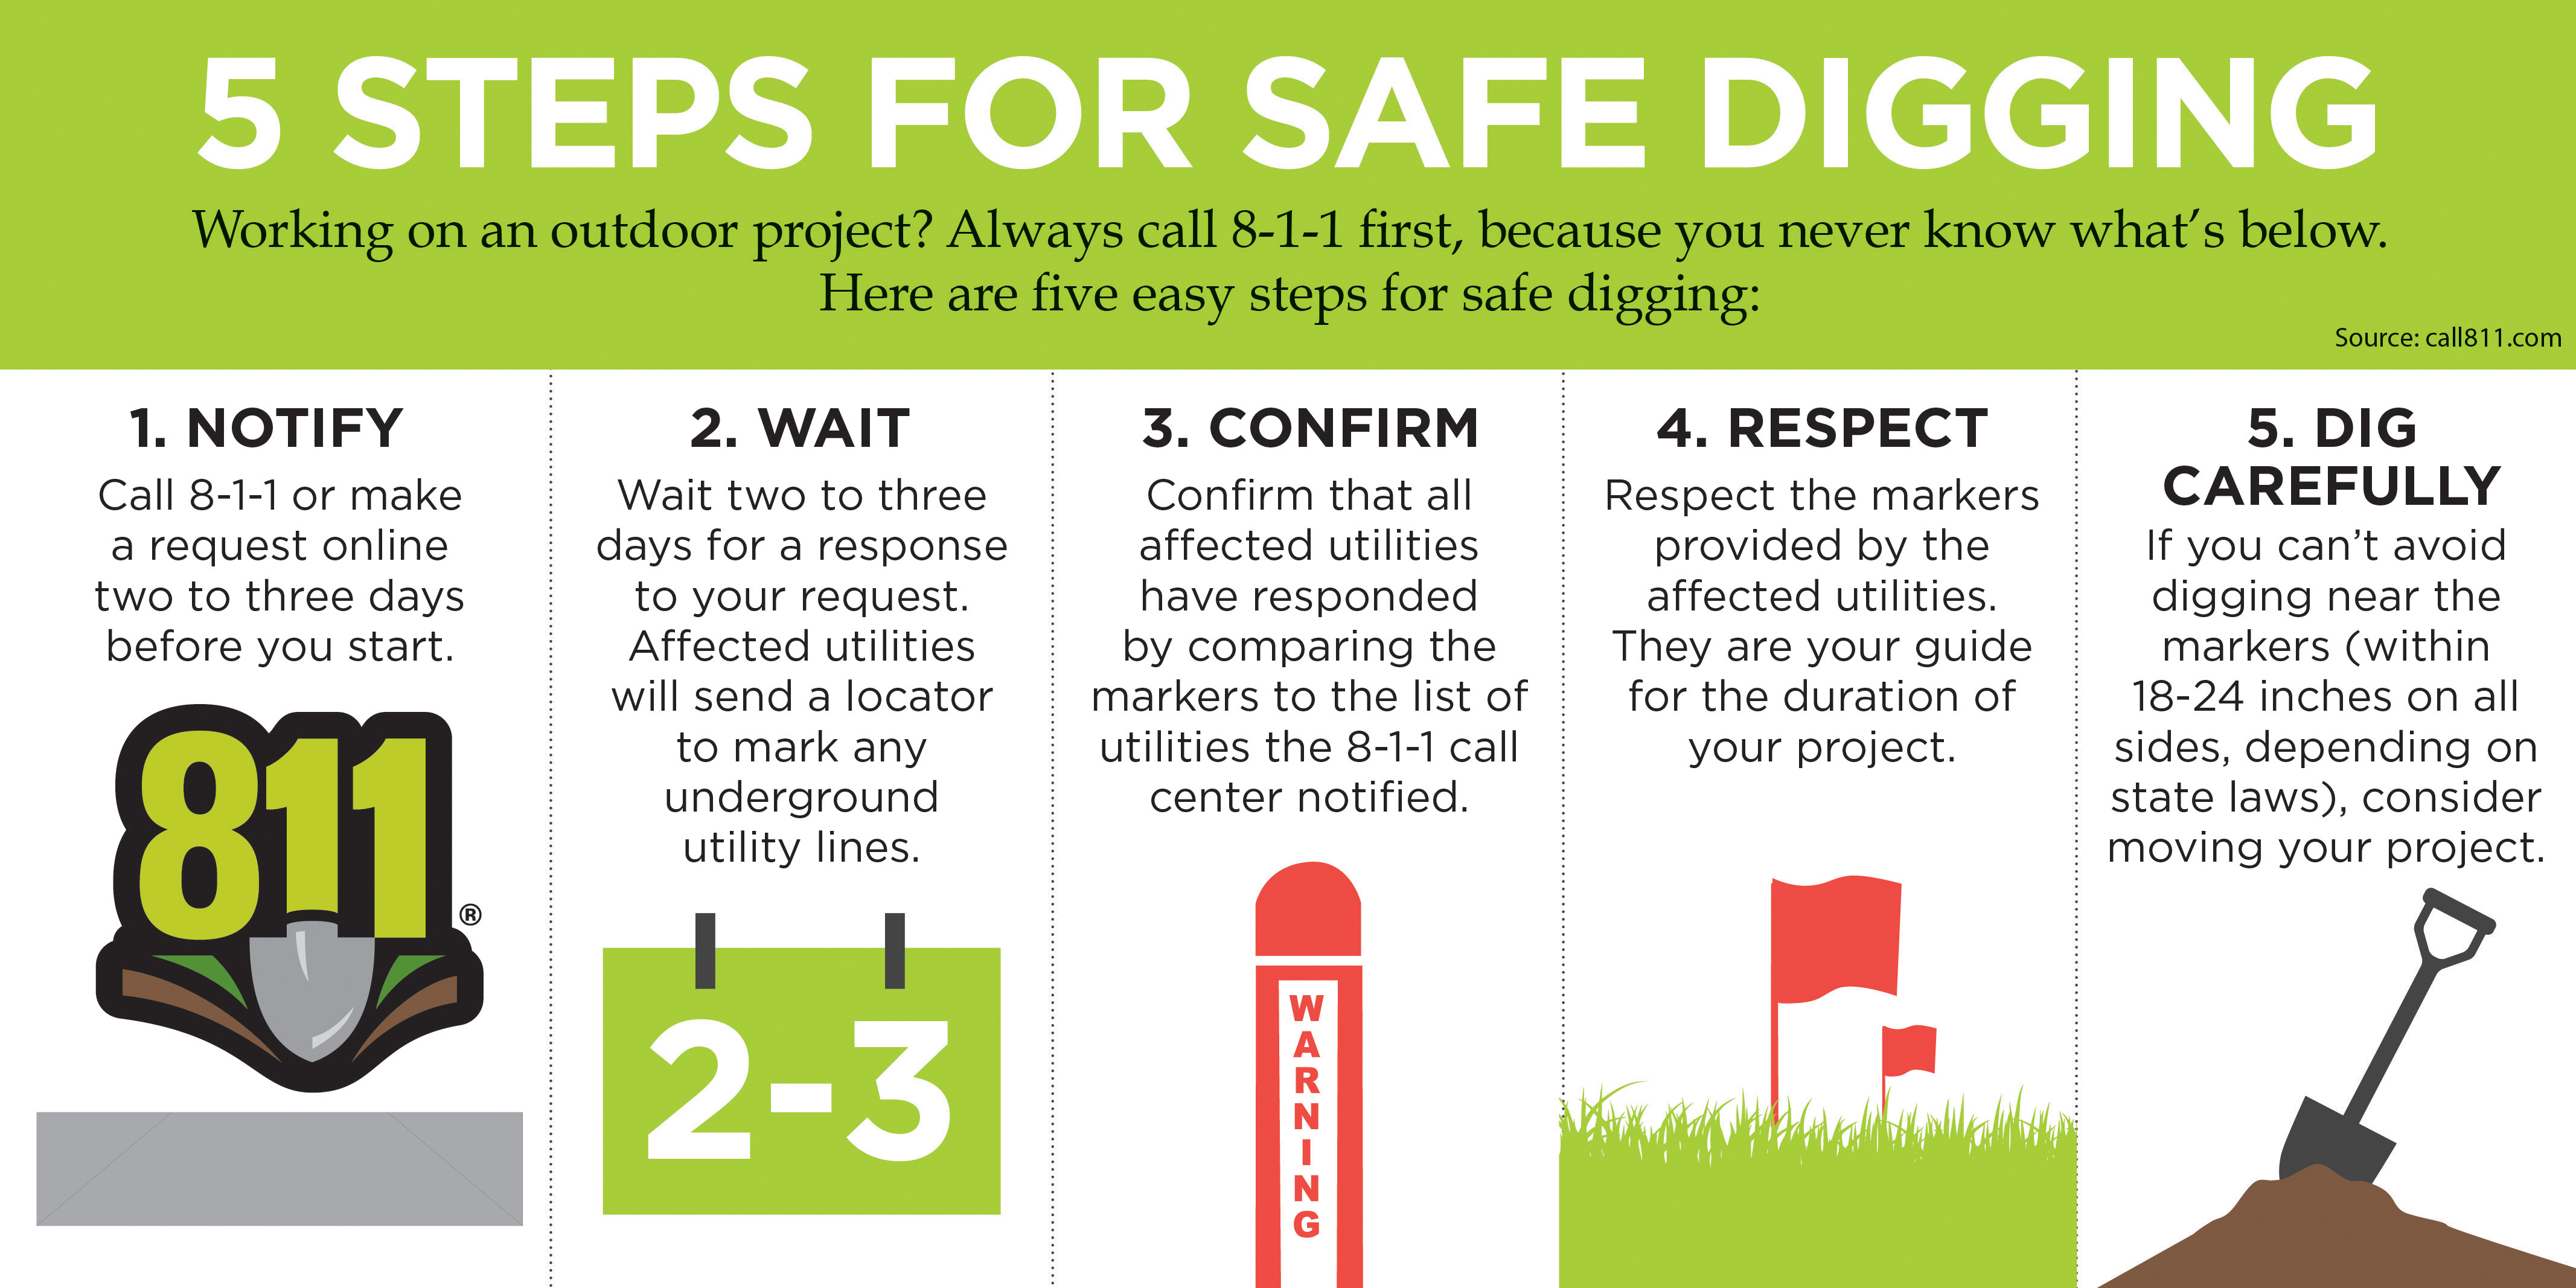 Always call before you dig! Dial 811 before beginning a digging project!